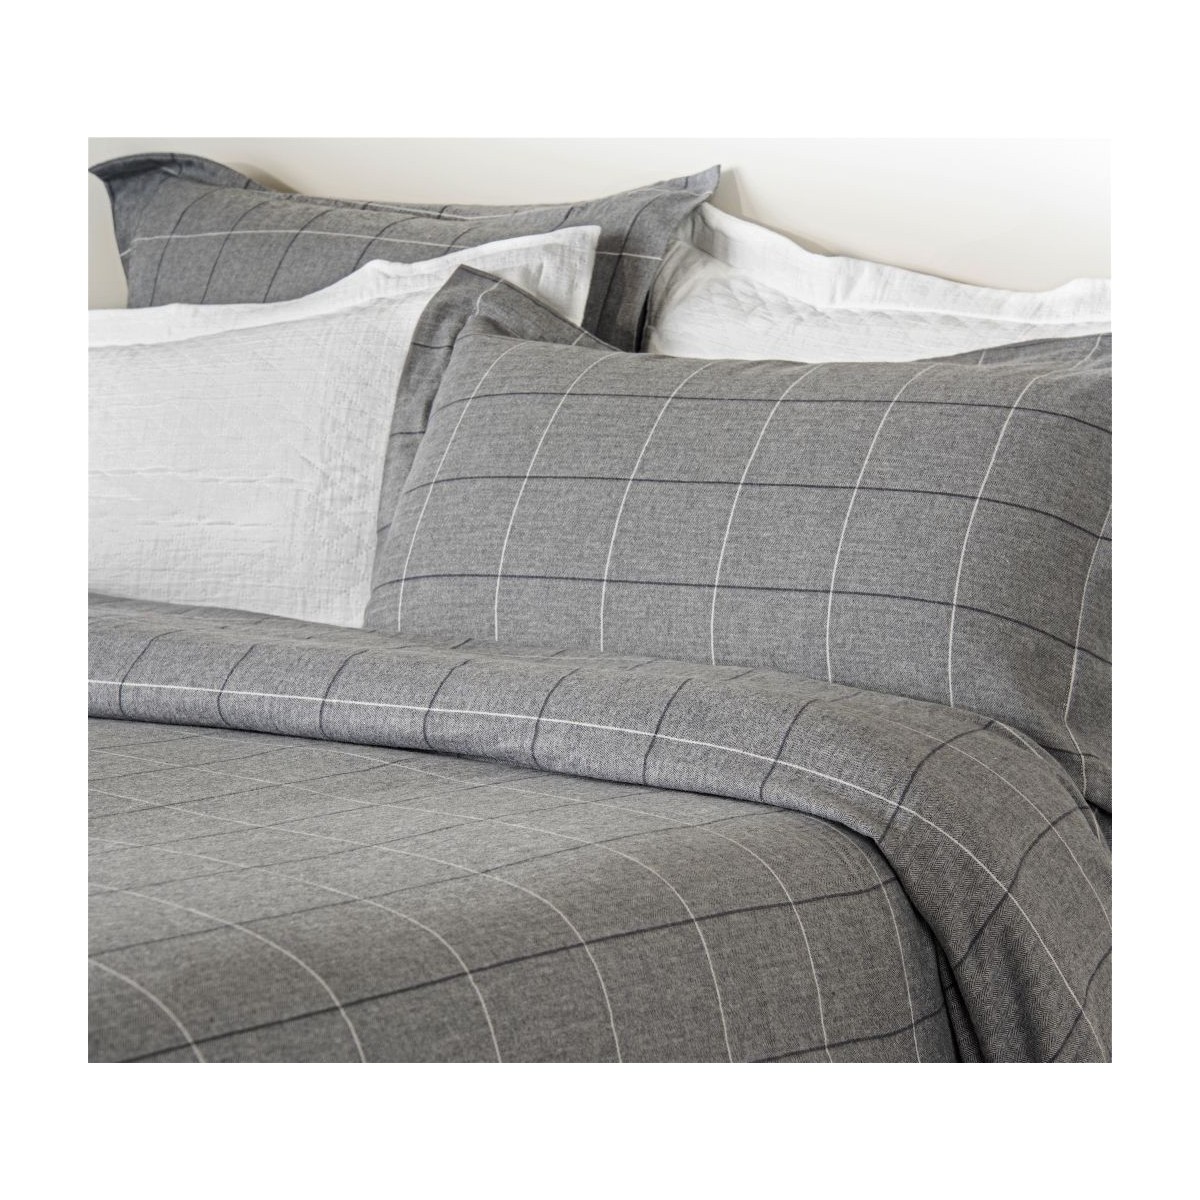 Acton Brushed Cotton Duvet Cover In Grey Double 200x200cm